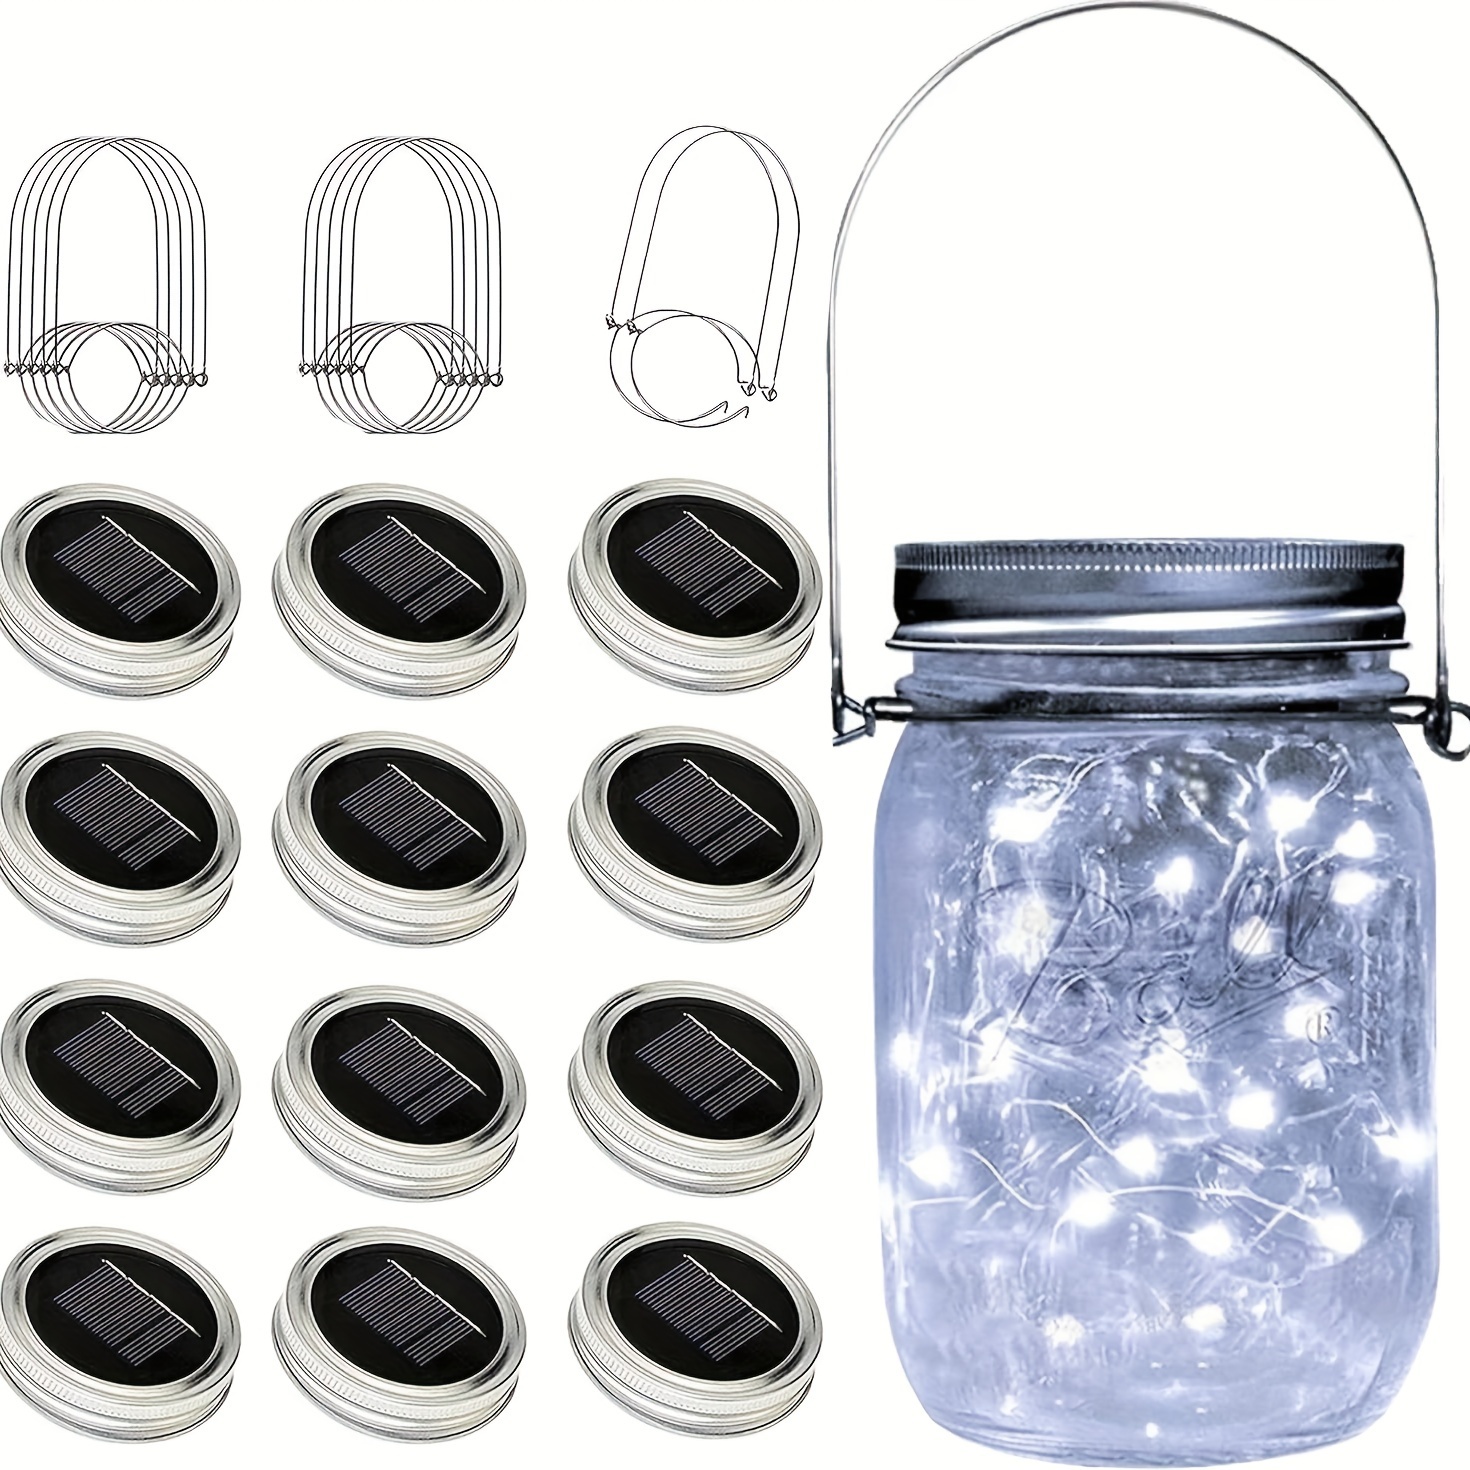 

Solar Lights For Outside, 12 Pack 30led Fairy Lights Mason Jar Solar Lids Outdoor Waterproof String Lights With Hanger (no Jars) Best For Patio Garden Yard Lawn Decor (cool White)